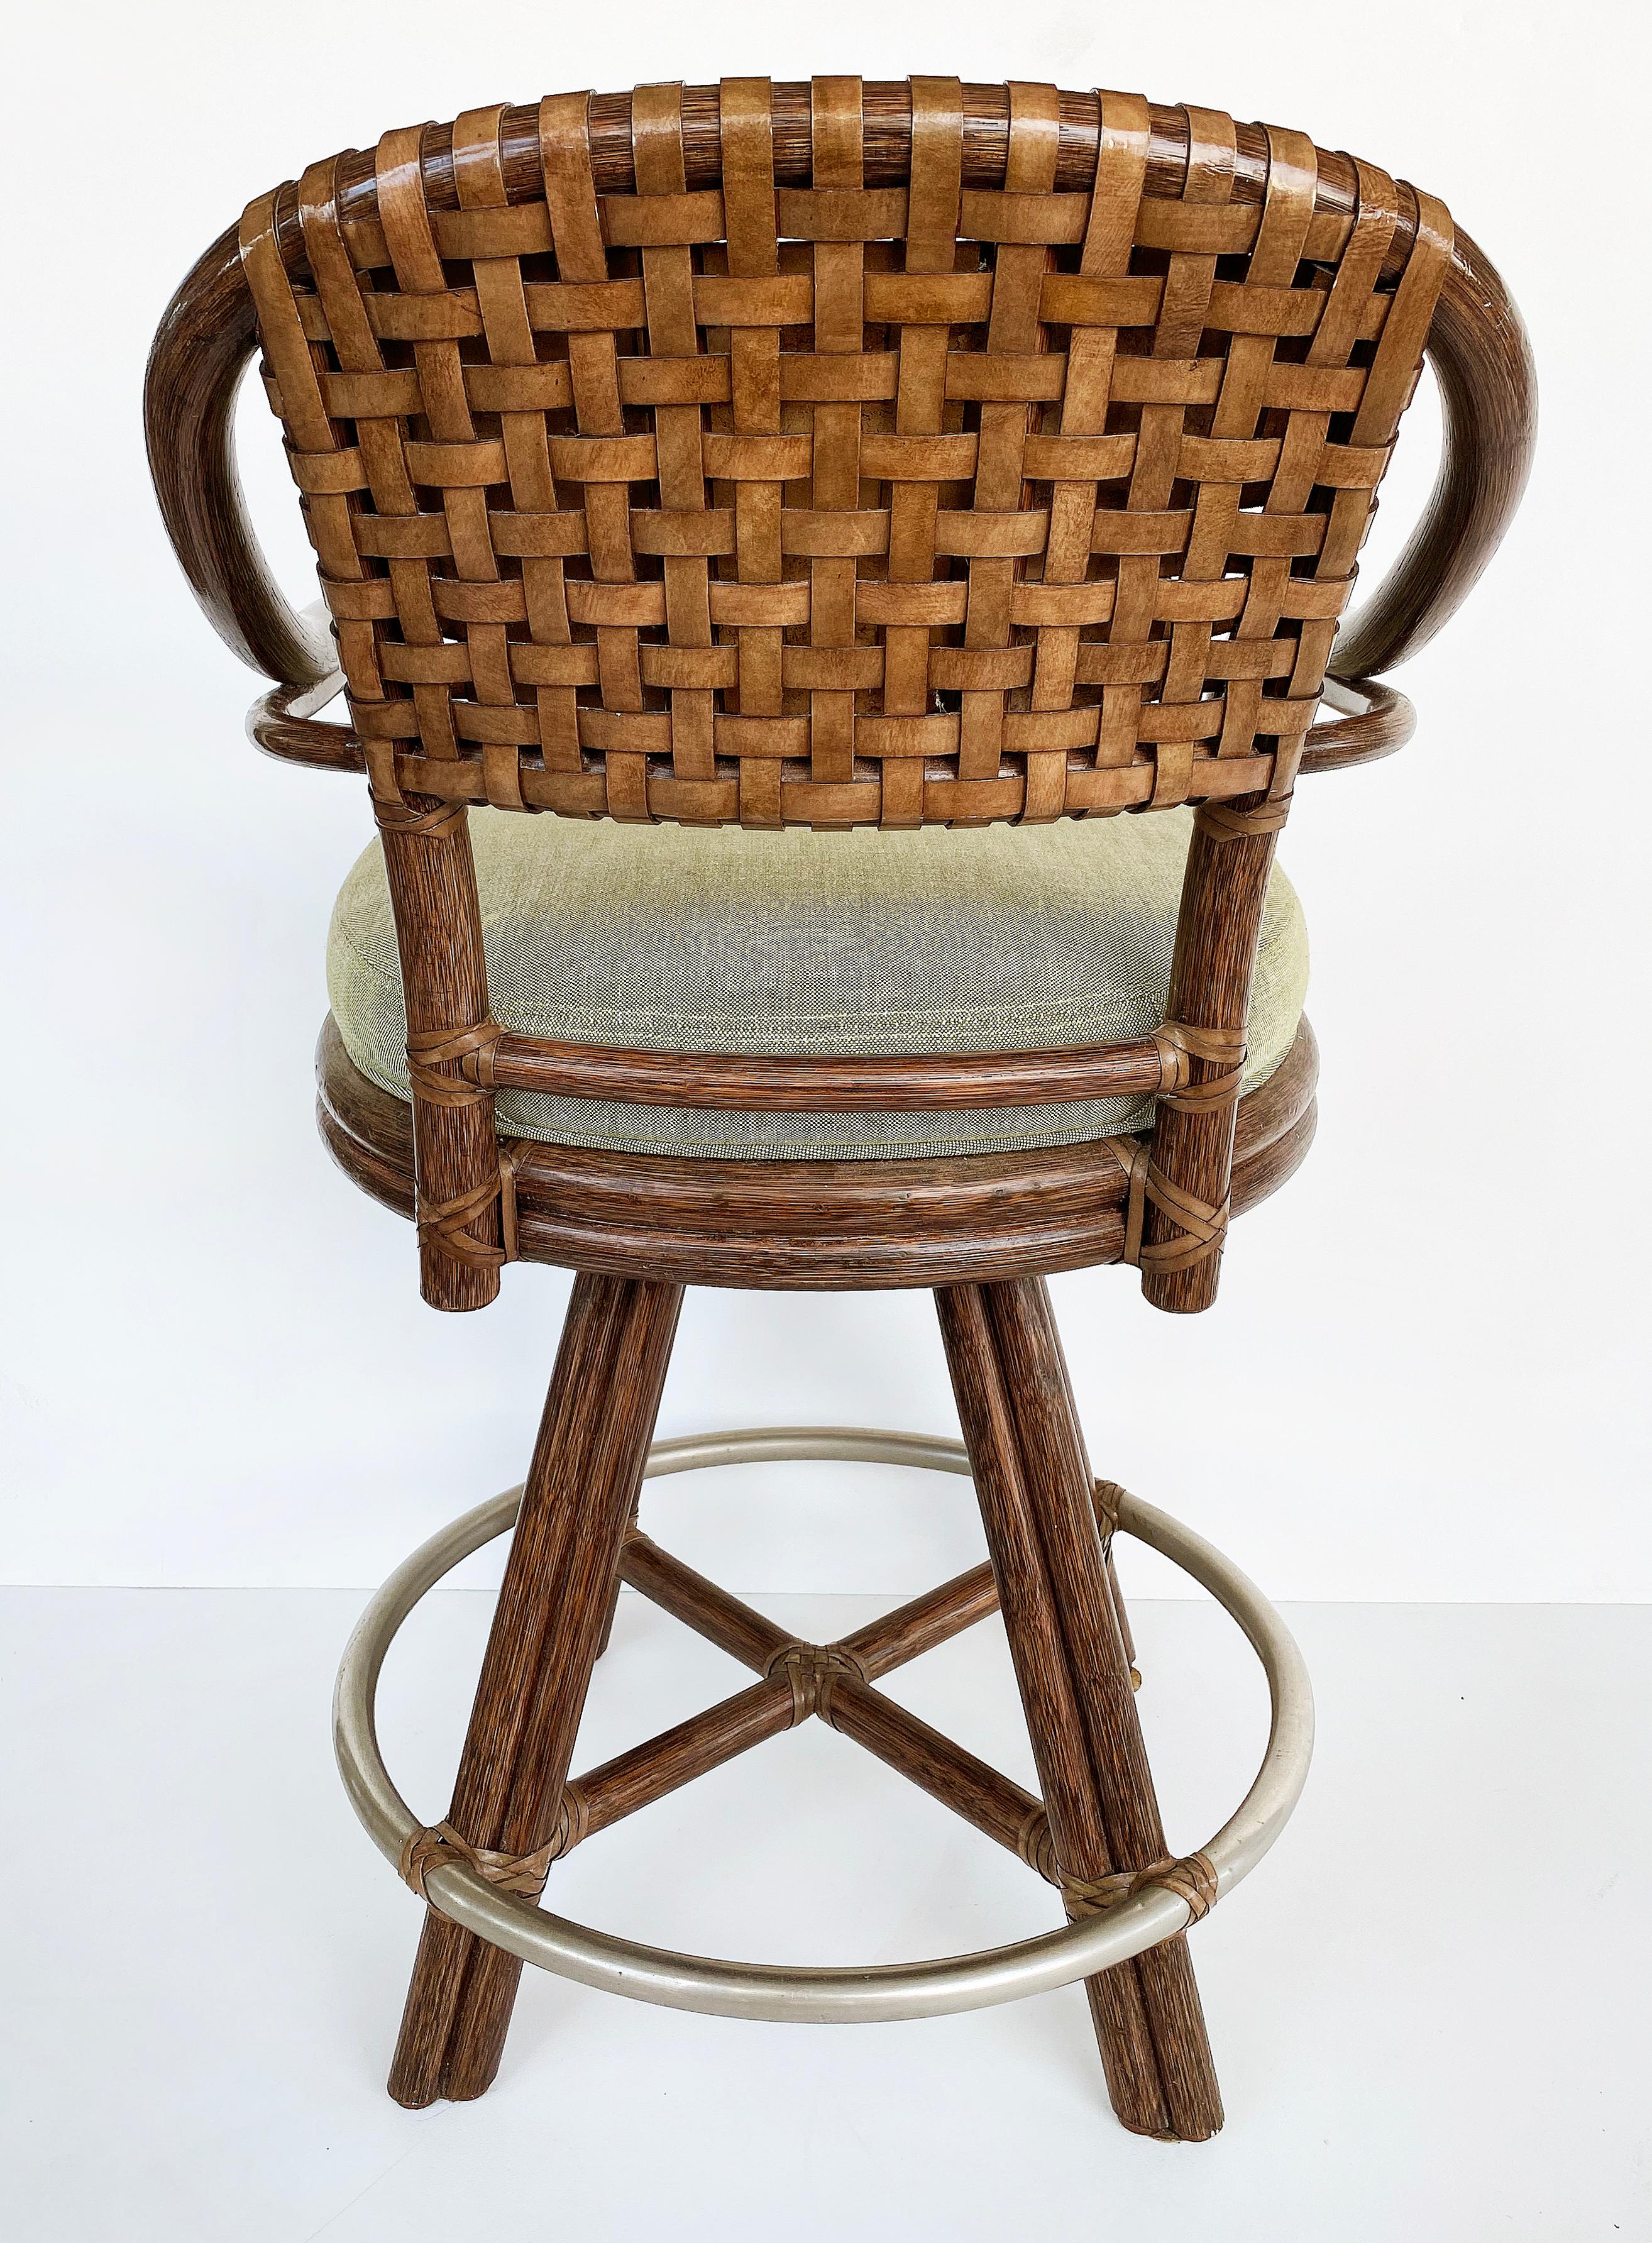 McGuire San Francisco Rattan, Rawhide Swivel Stools, Pair In Good Condition For Sale In Miami, FL